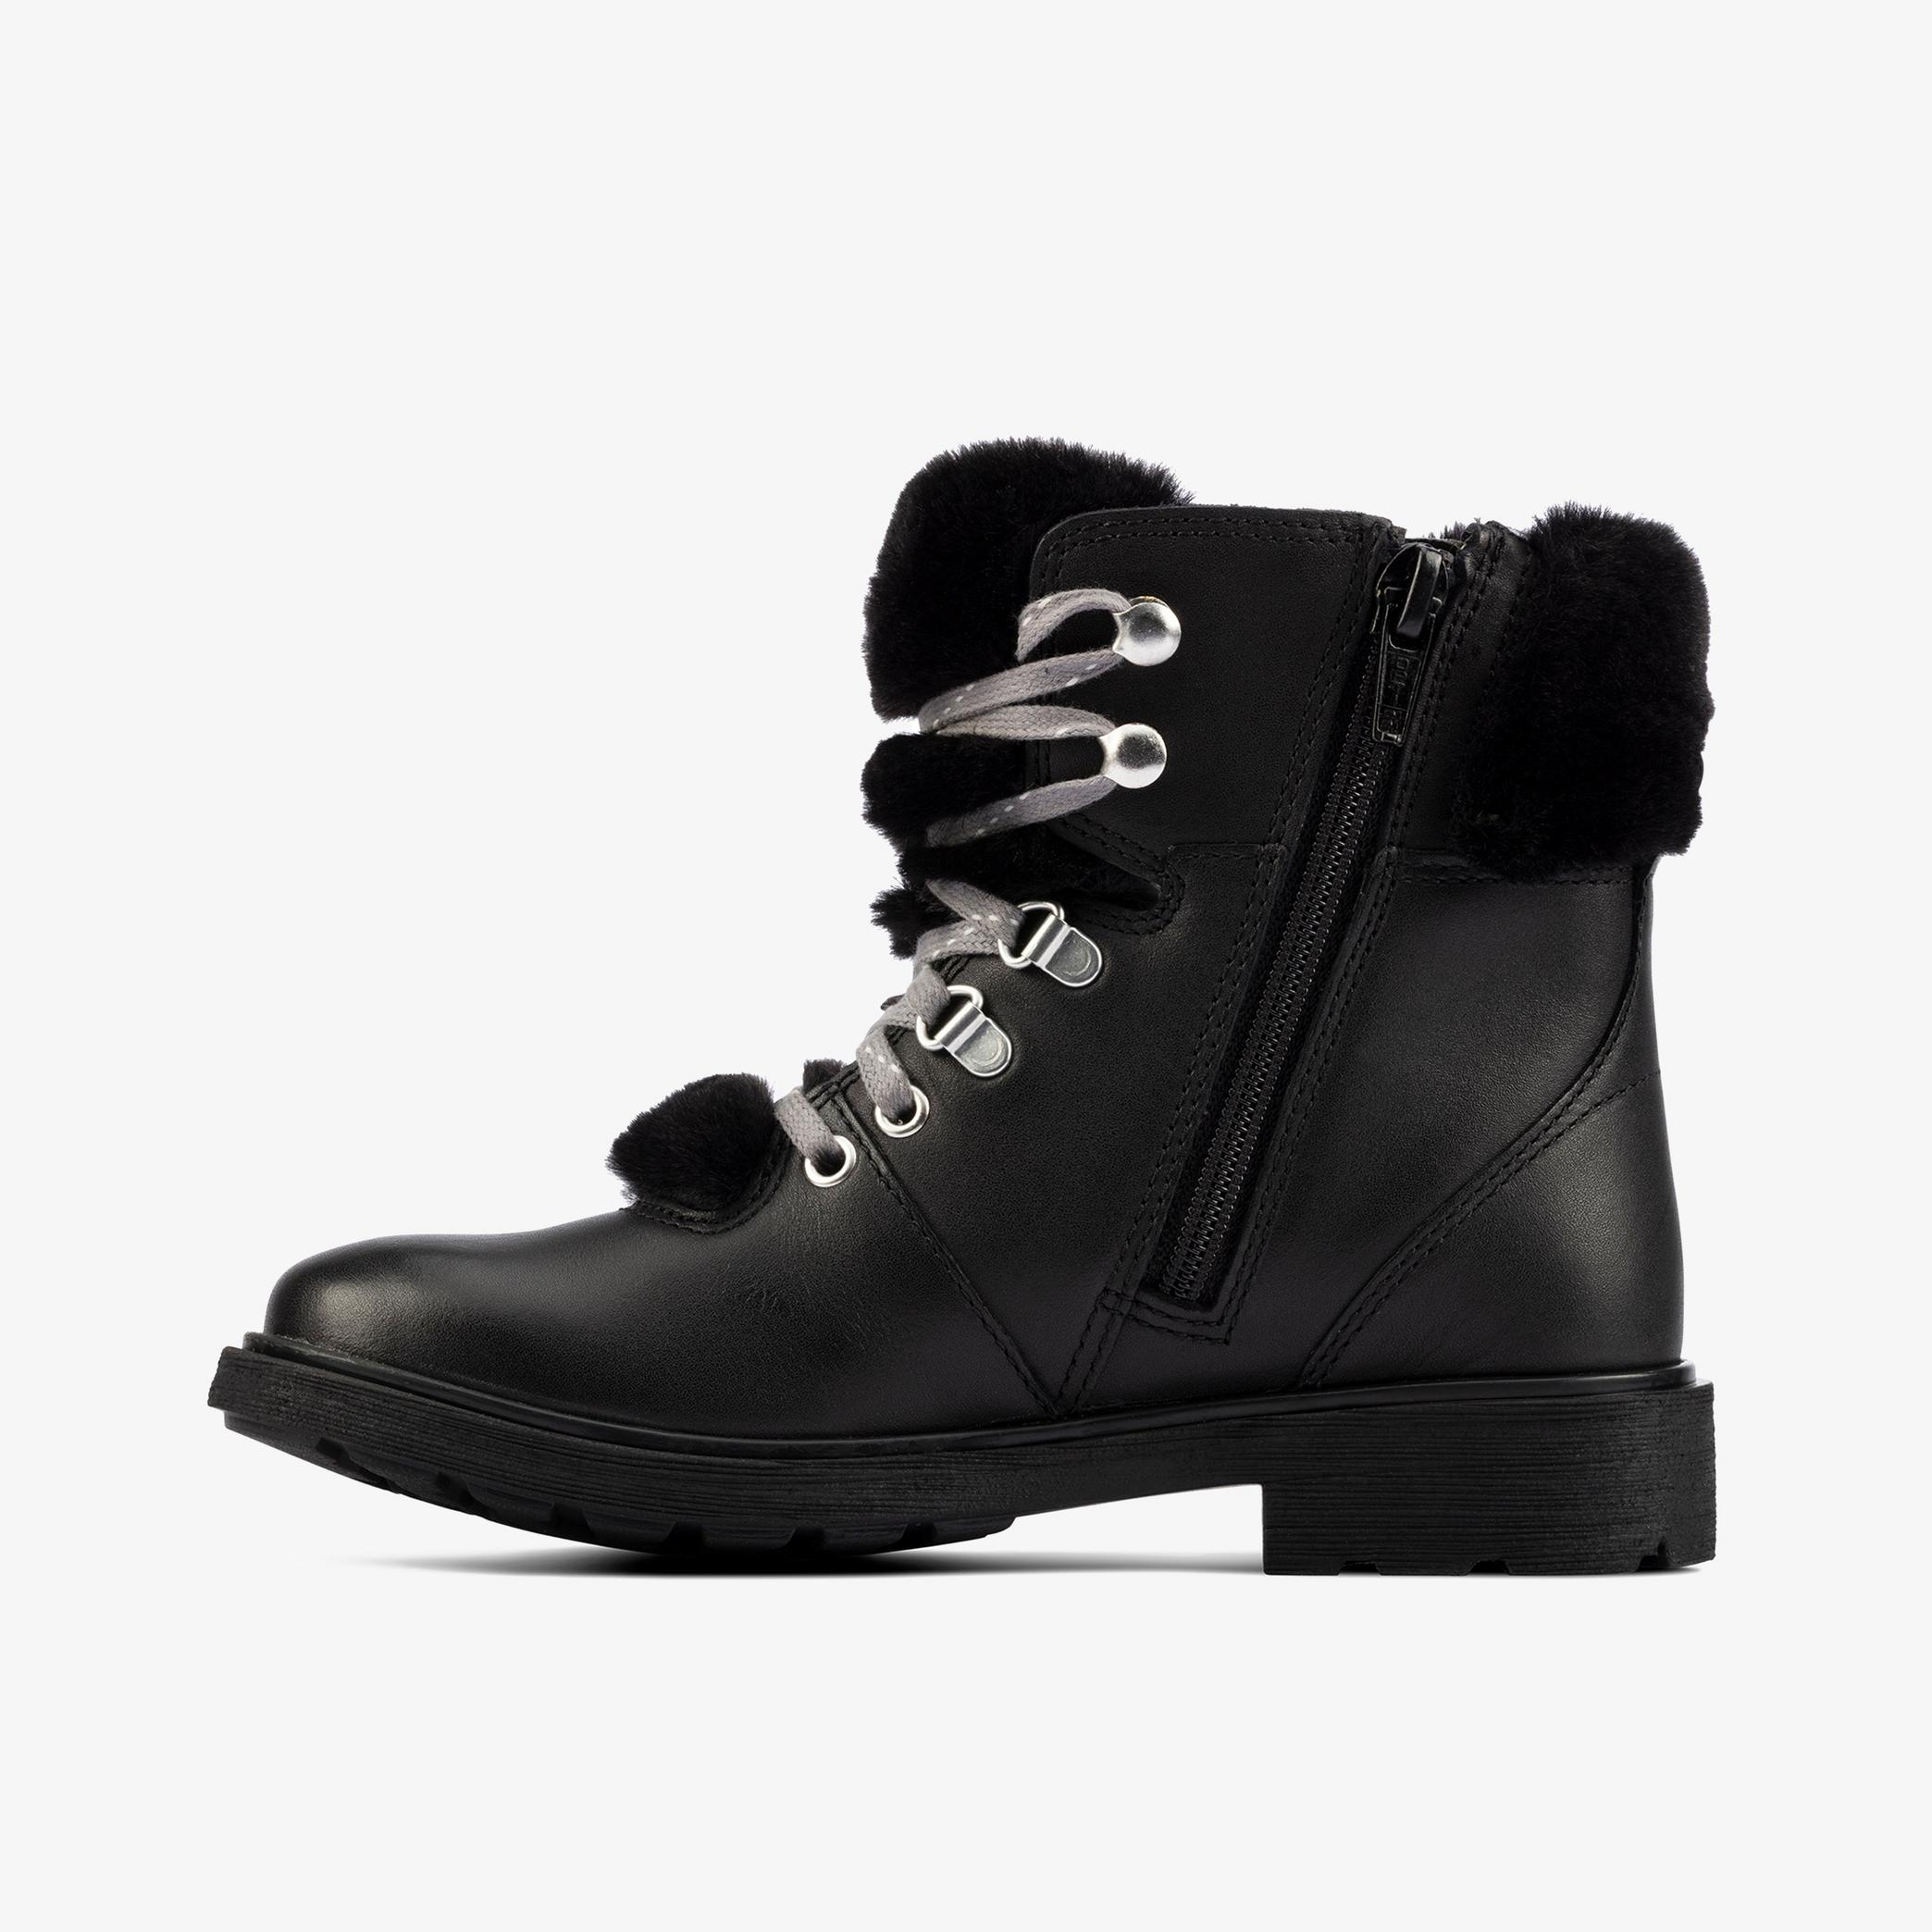 Astrol Hiker Kid Black Leather Ankle Boots, view 2 of 6